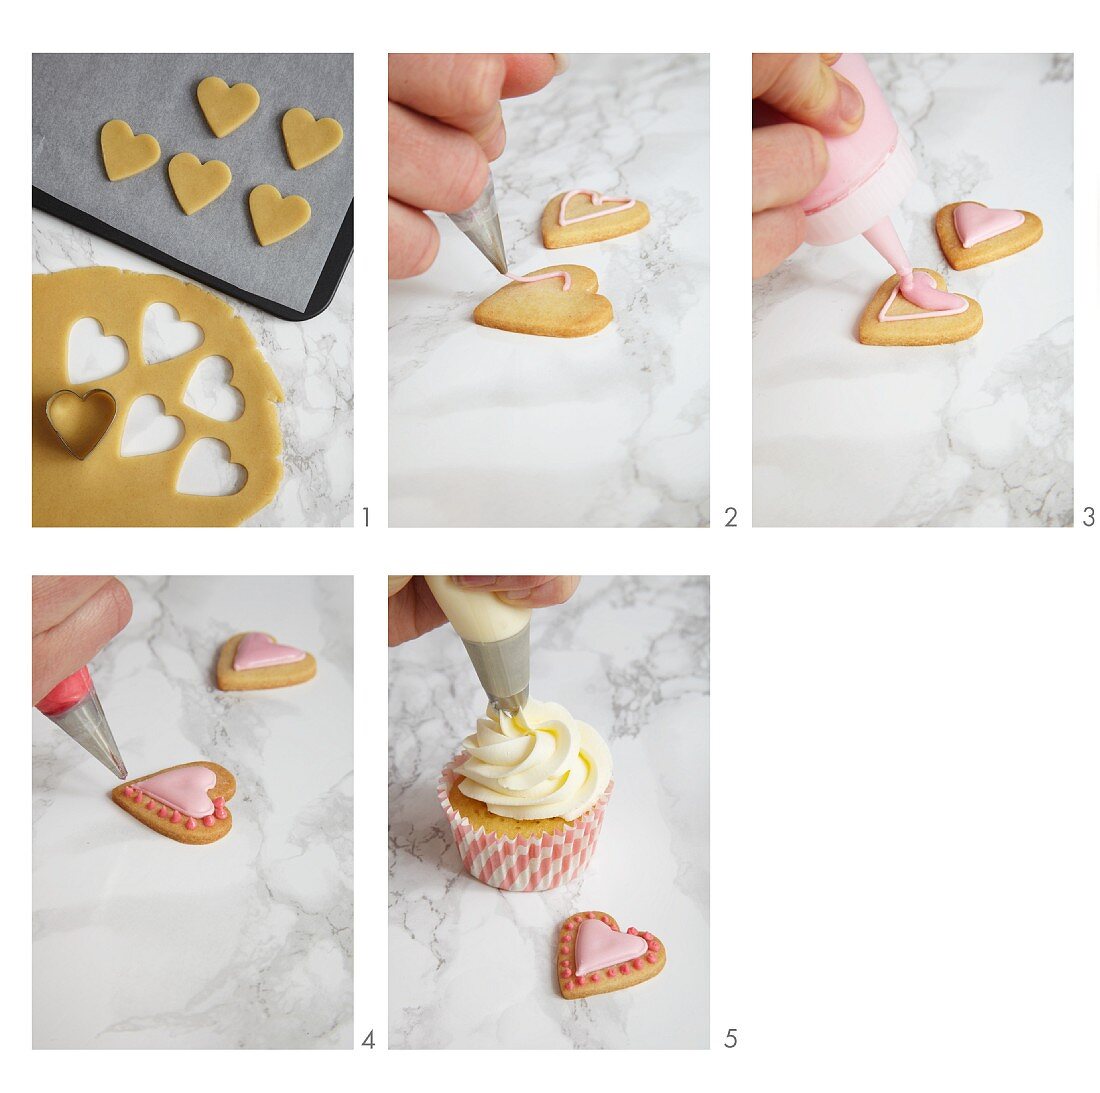 Swirl cupcakes decorated with heart biscuits being made